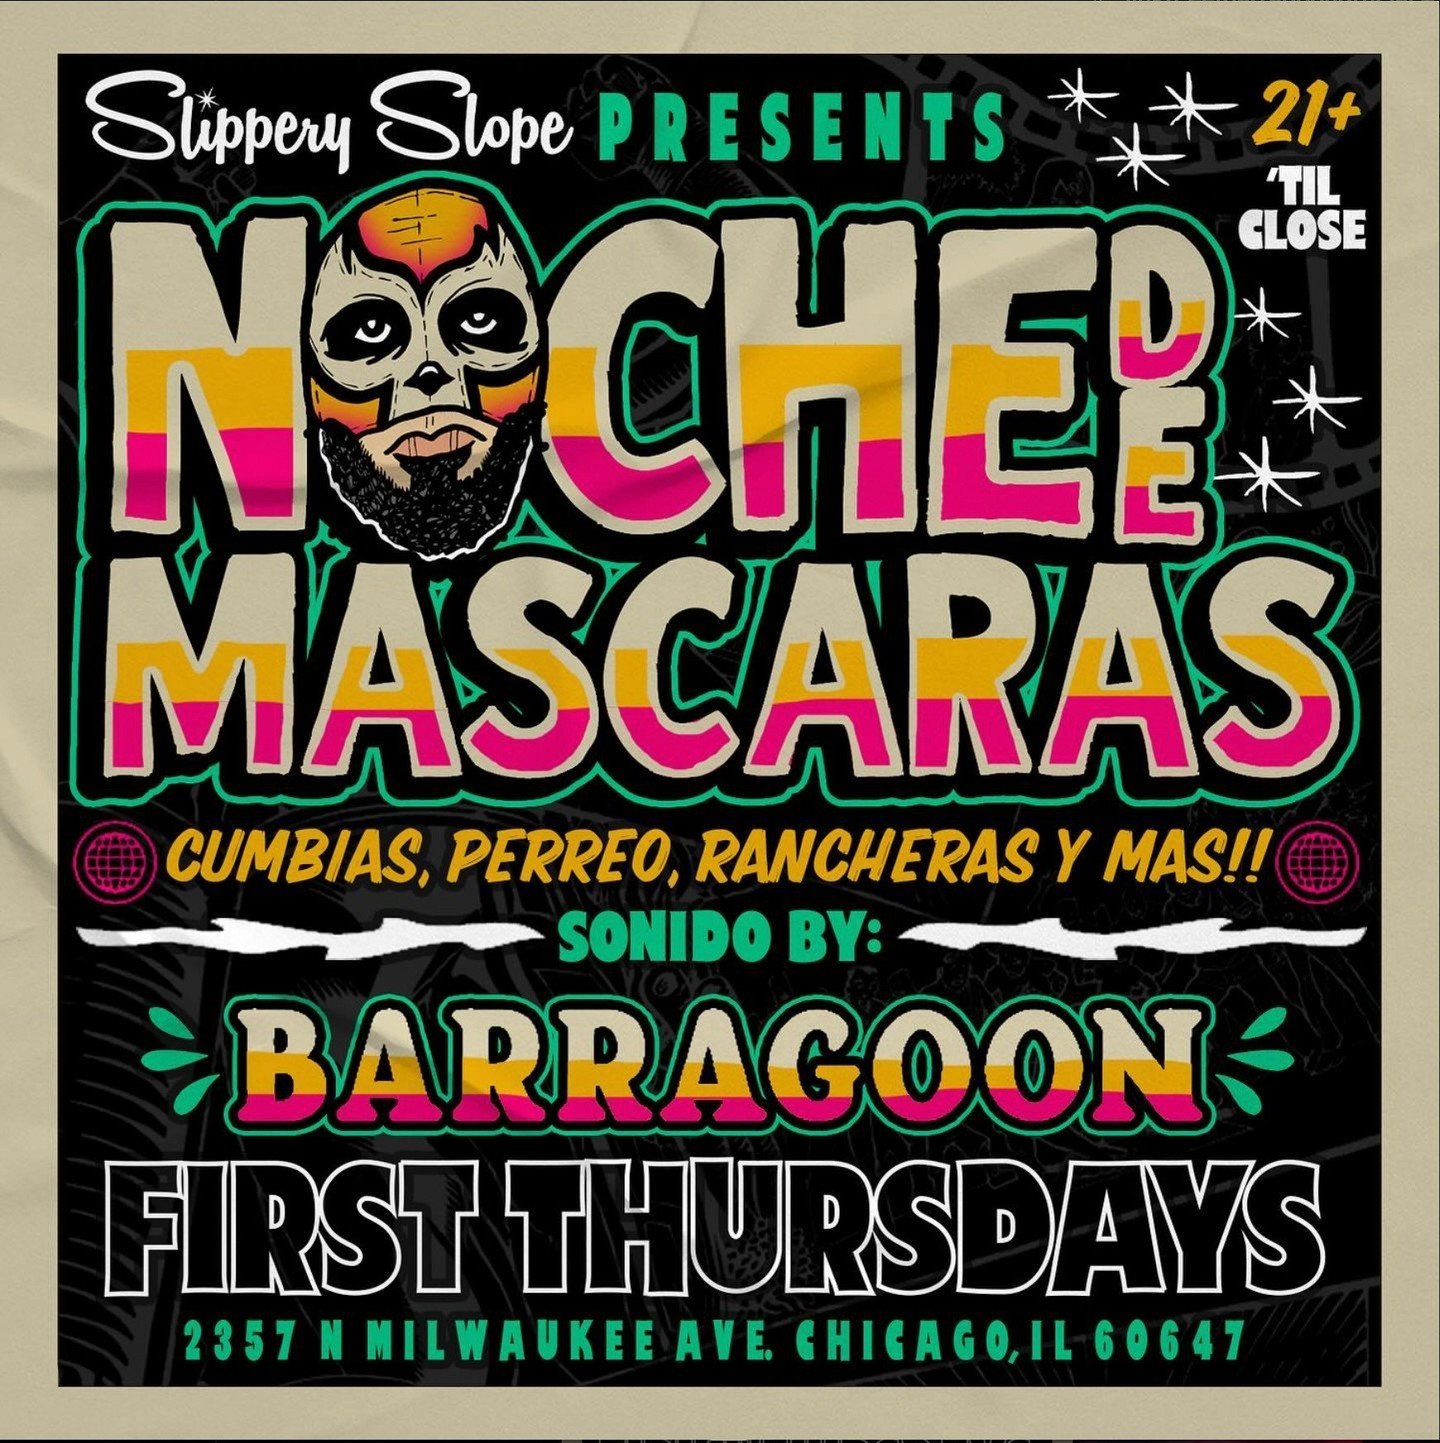 It&rsquo;s officially May, and it&rsquo;s the first Thursday of the month! That means @barragoonofficial will be dropping by for Noche de Mascaras! Come on by and get down to some Cumbia, Perreo, Rancheras y mas! And don&rsquo;t forget about Tequila 